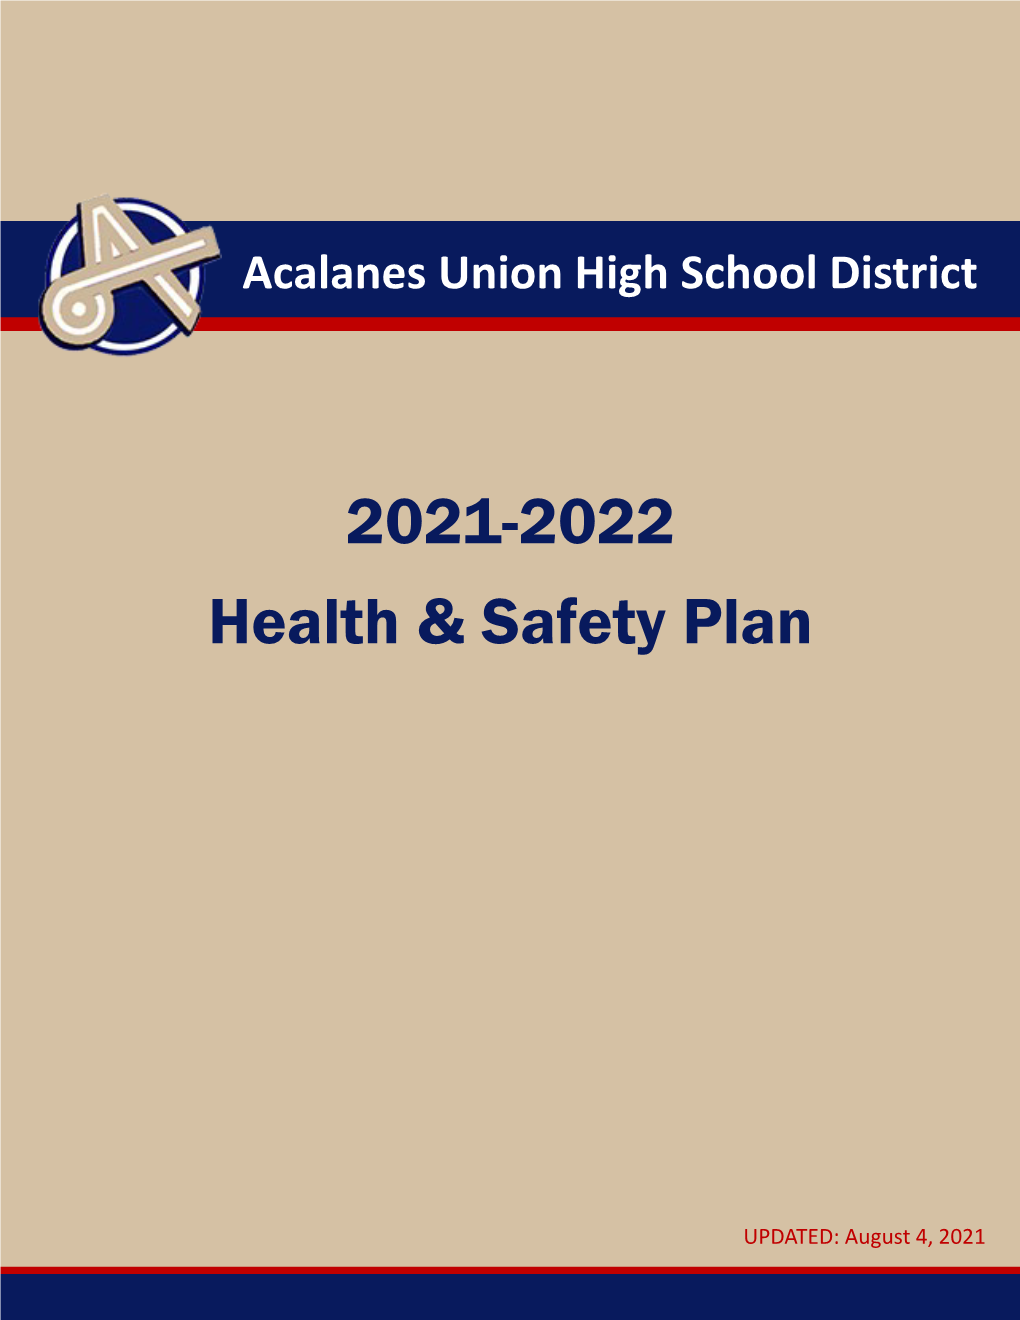 AUHSD 2021-2022 Health and Safety Plan Documents the General Safety Procedures and Protocols for the District